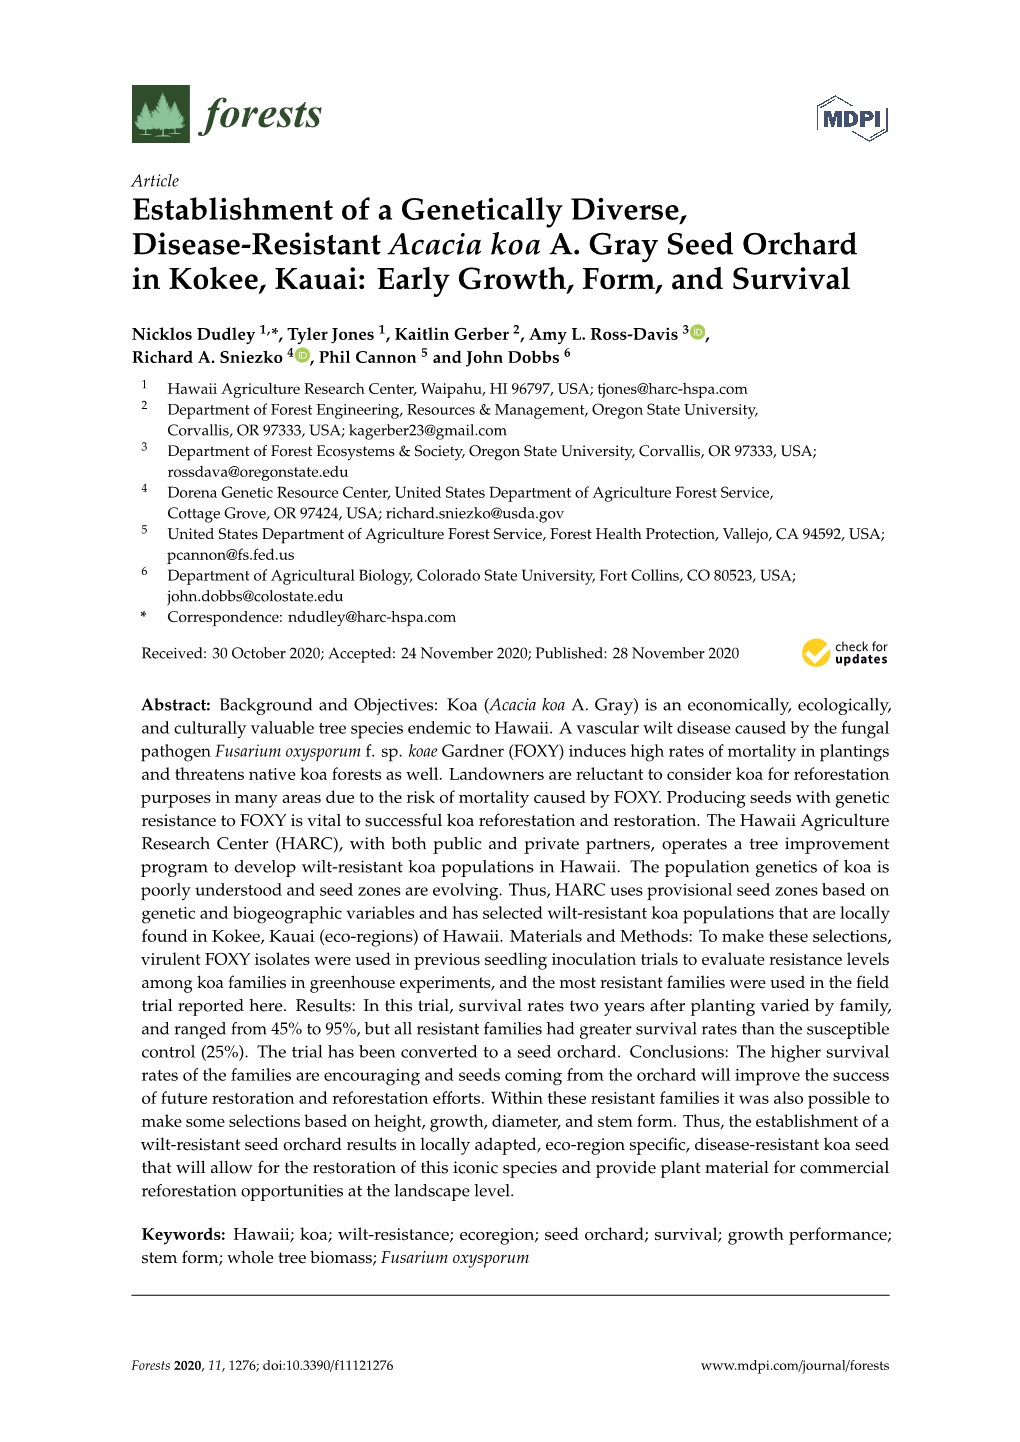 Establishment of a Genetically Diverse, Disease-Resistant Acacia Koa A. Gray Seed Orchard in Kokee, Kauai: Early Growth, Form, and Survival